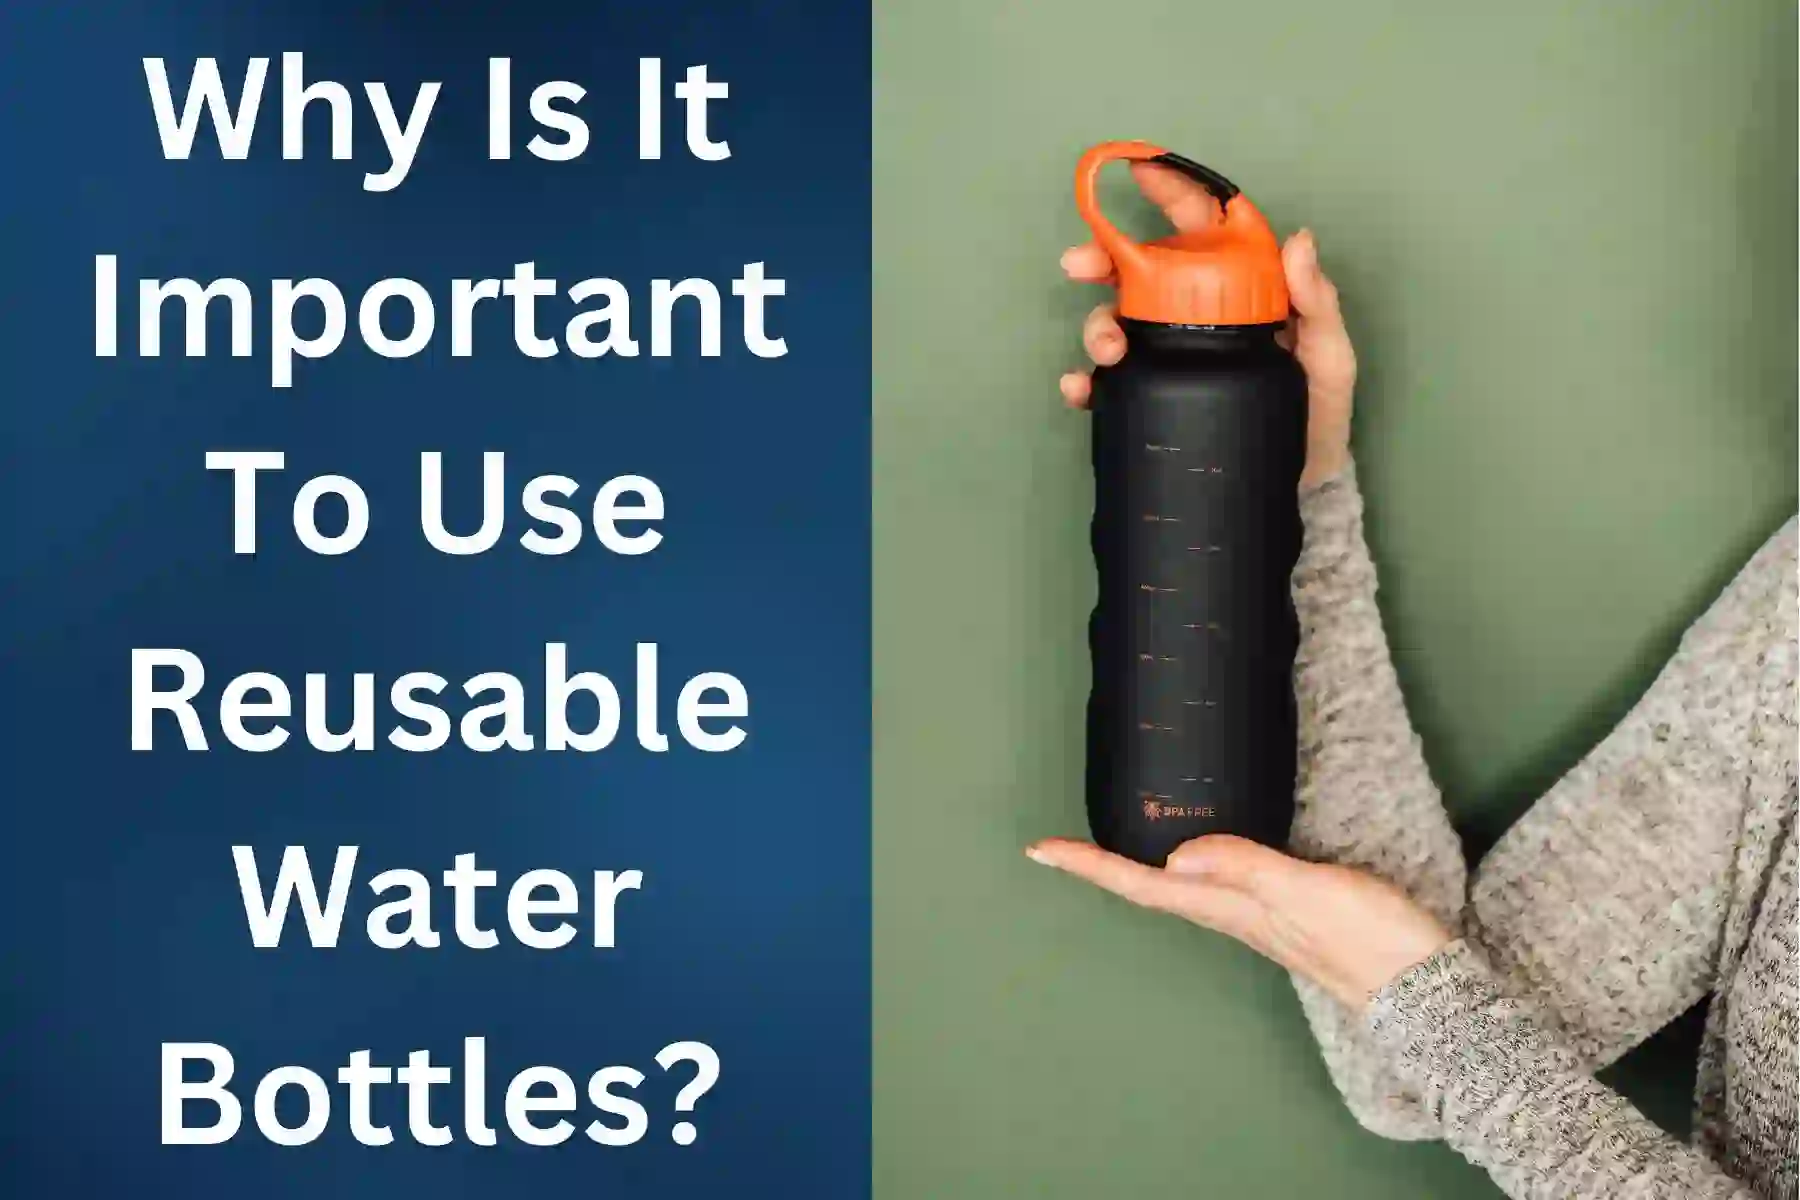 Why Is It Important To Use Reusable Water Bottles